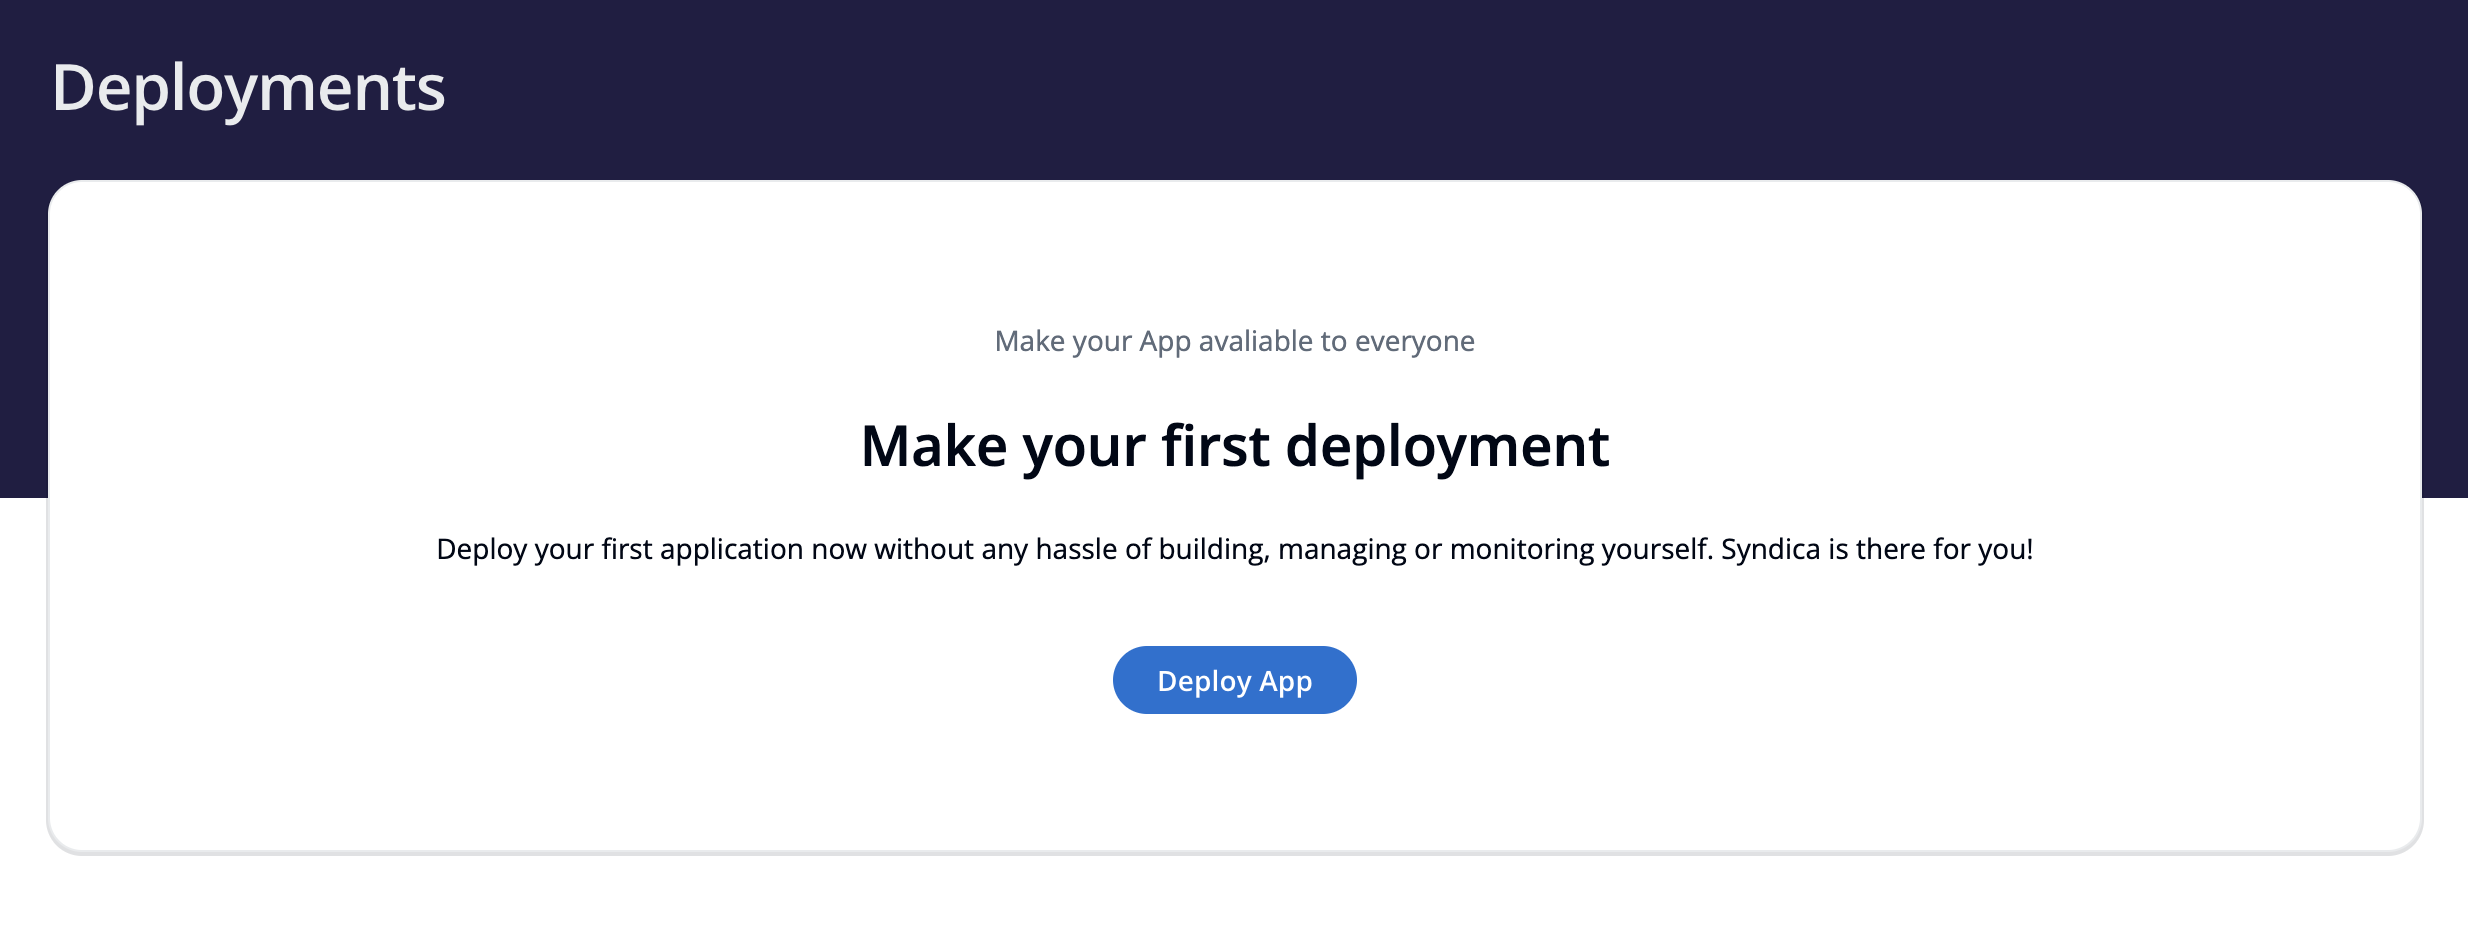 Deployments section, prompting you to create a deployment